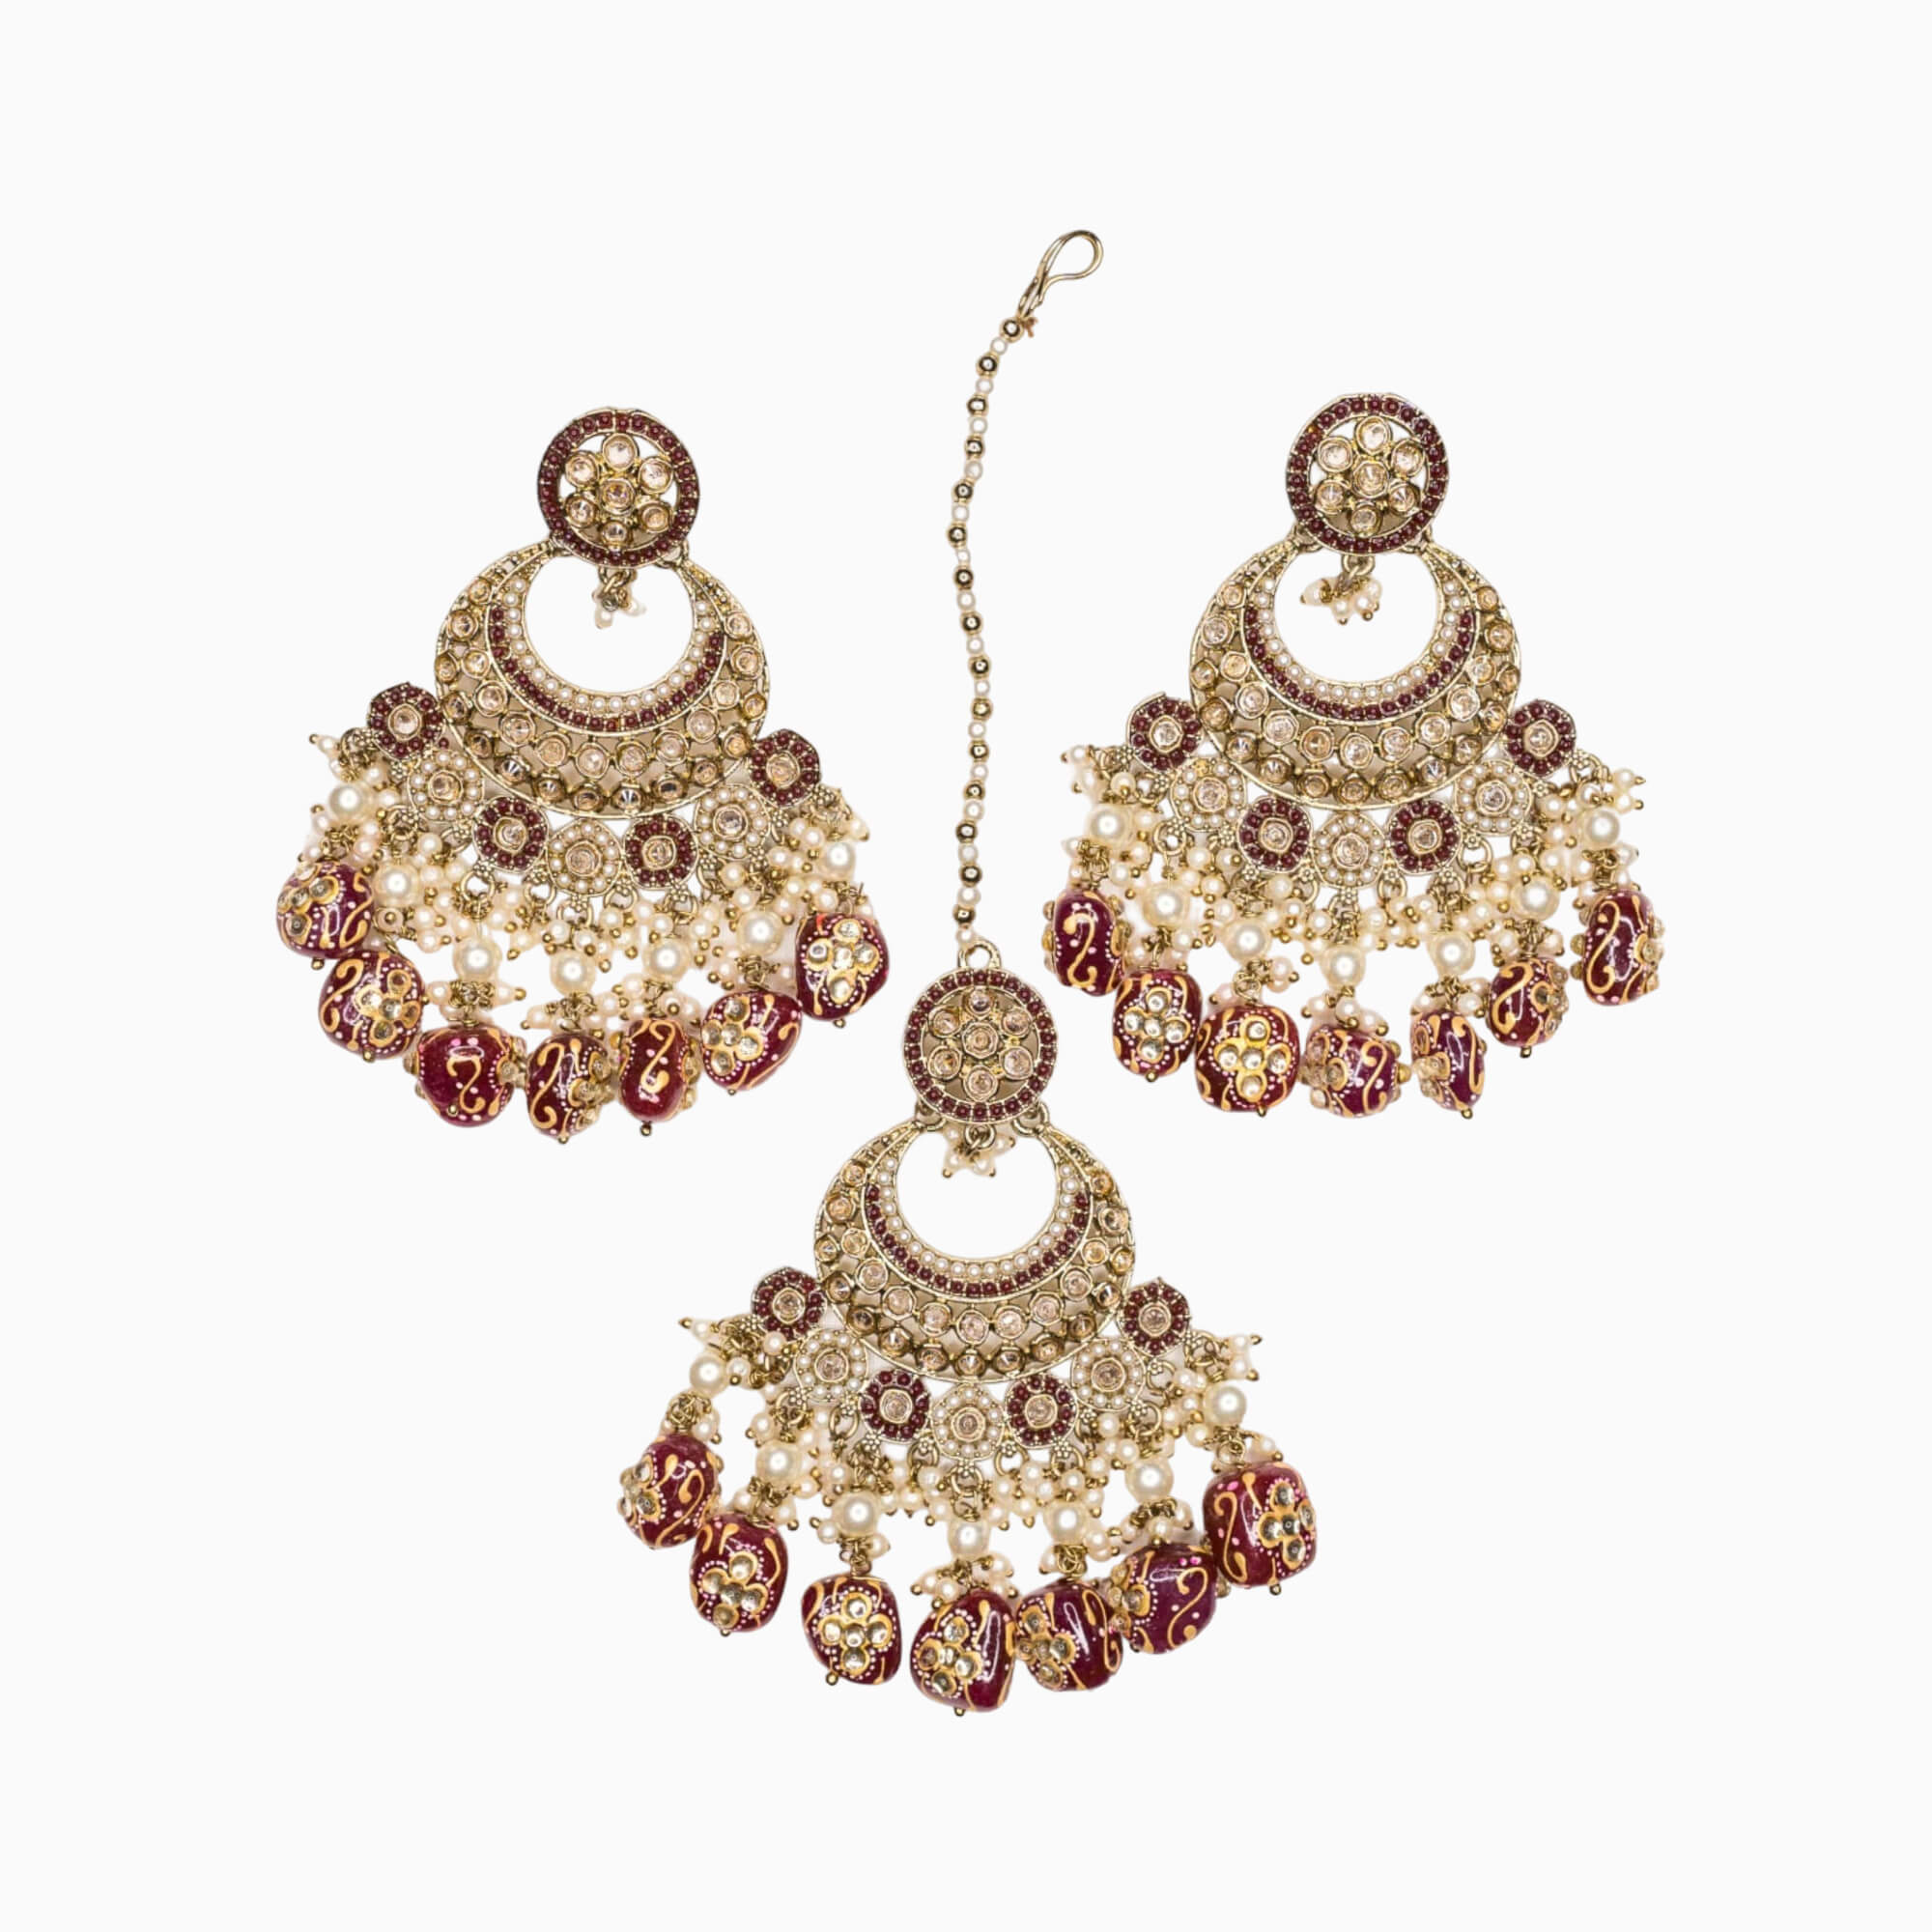 Buy Maang Tikka Earrings Set online at lowest price Starts at Rs.100/- only